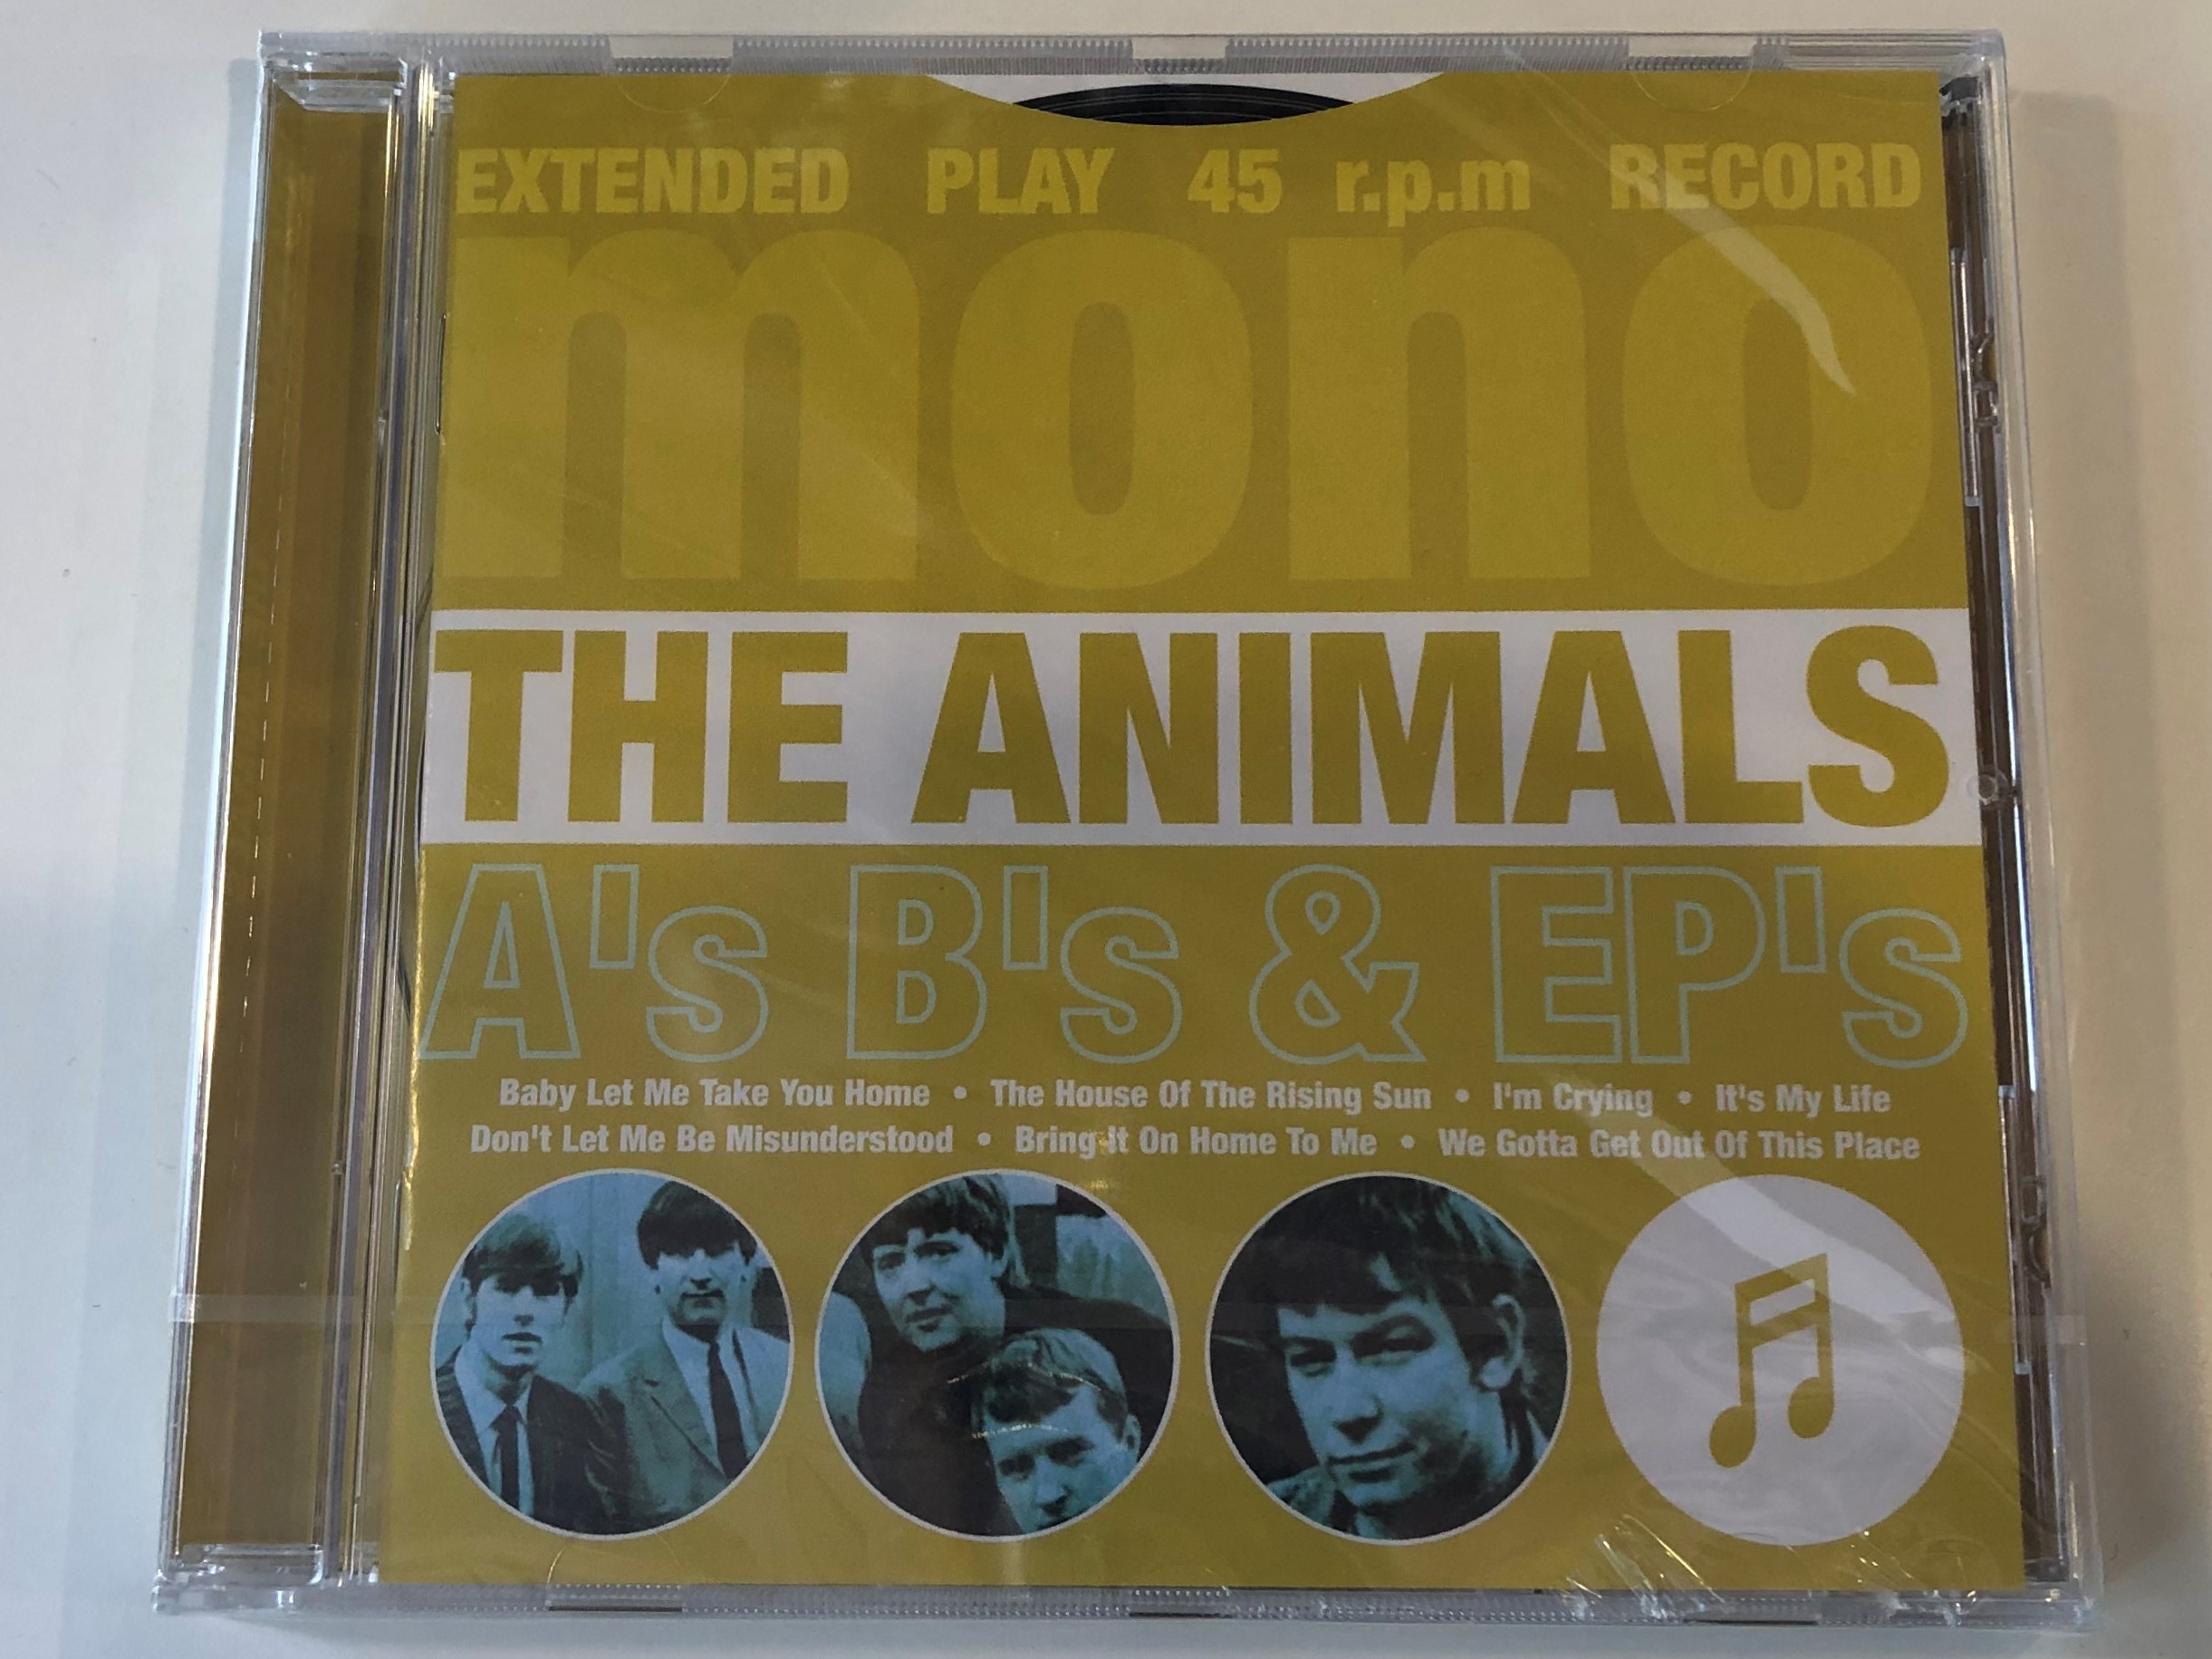 The Animals ‎– A's B's & EP's / Extended Play 45 r.p.m Record Mono / Baby  Let Me Take You Home, The House Of The Rising Sun, I'm Crying, It's My Life,